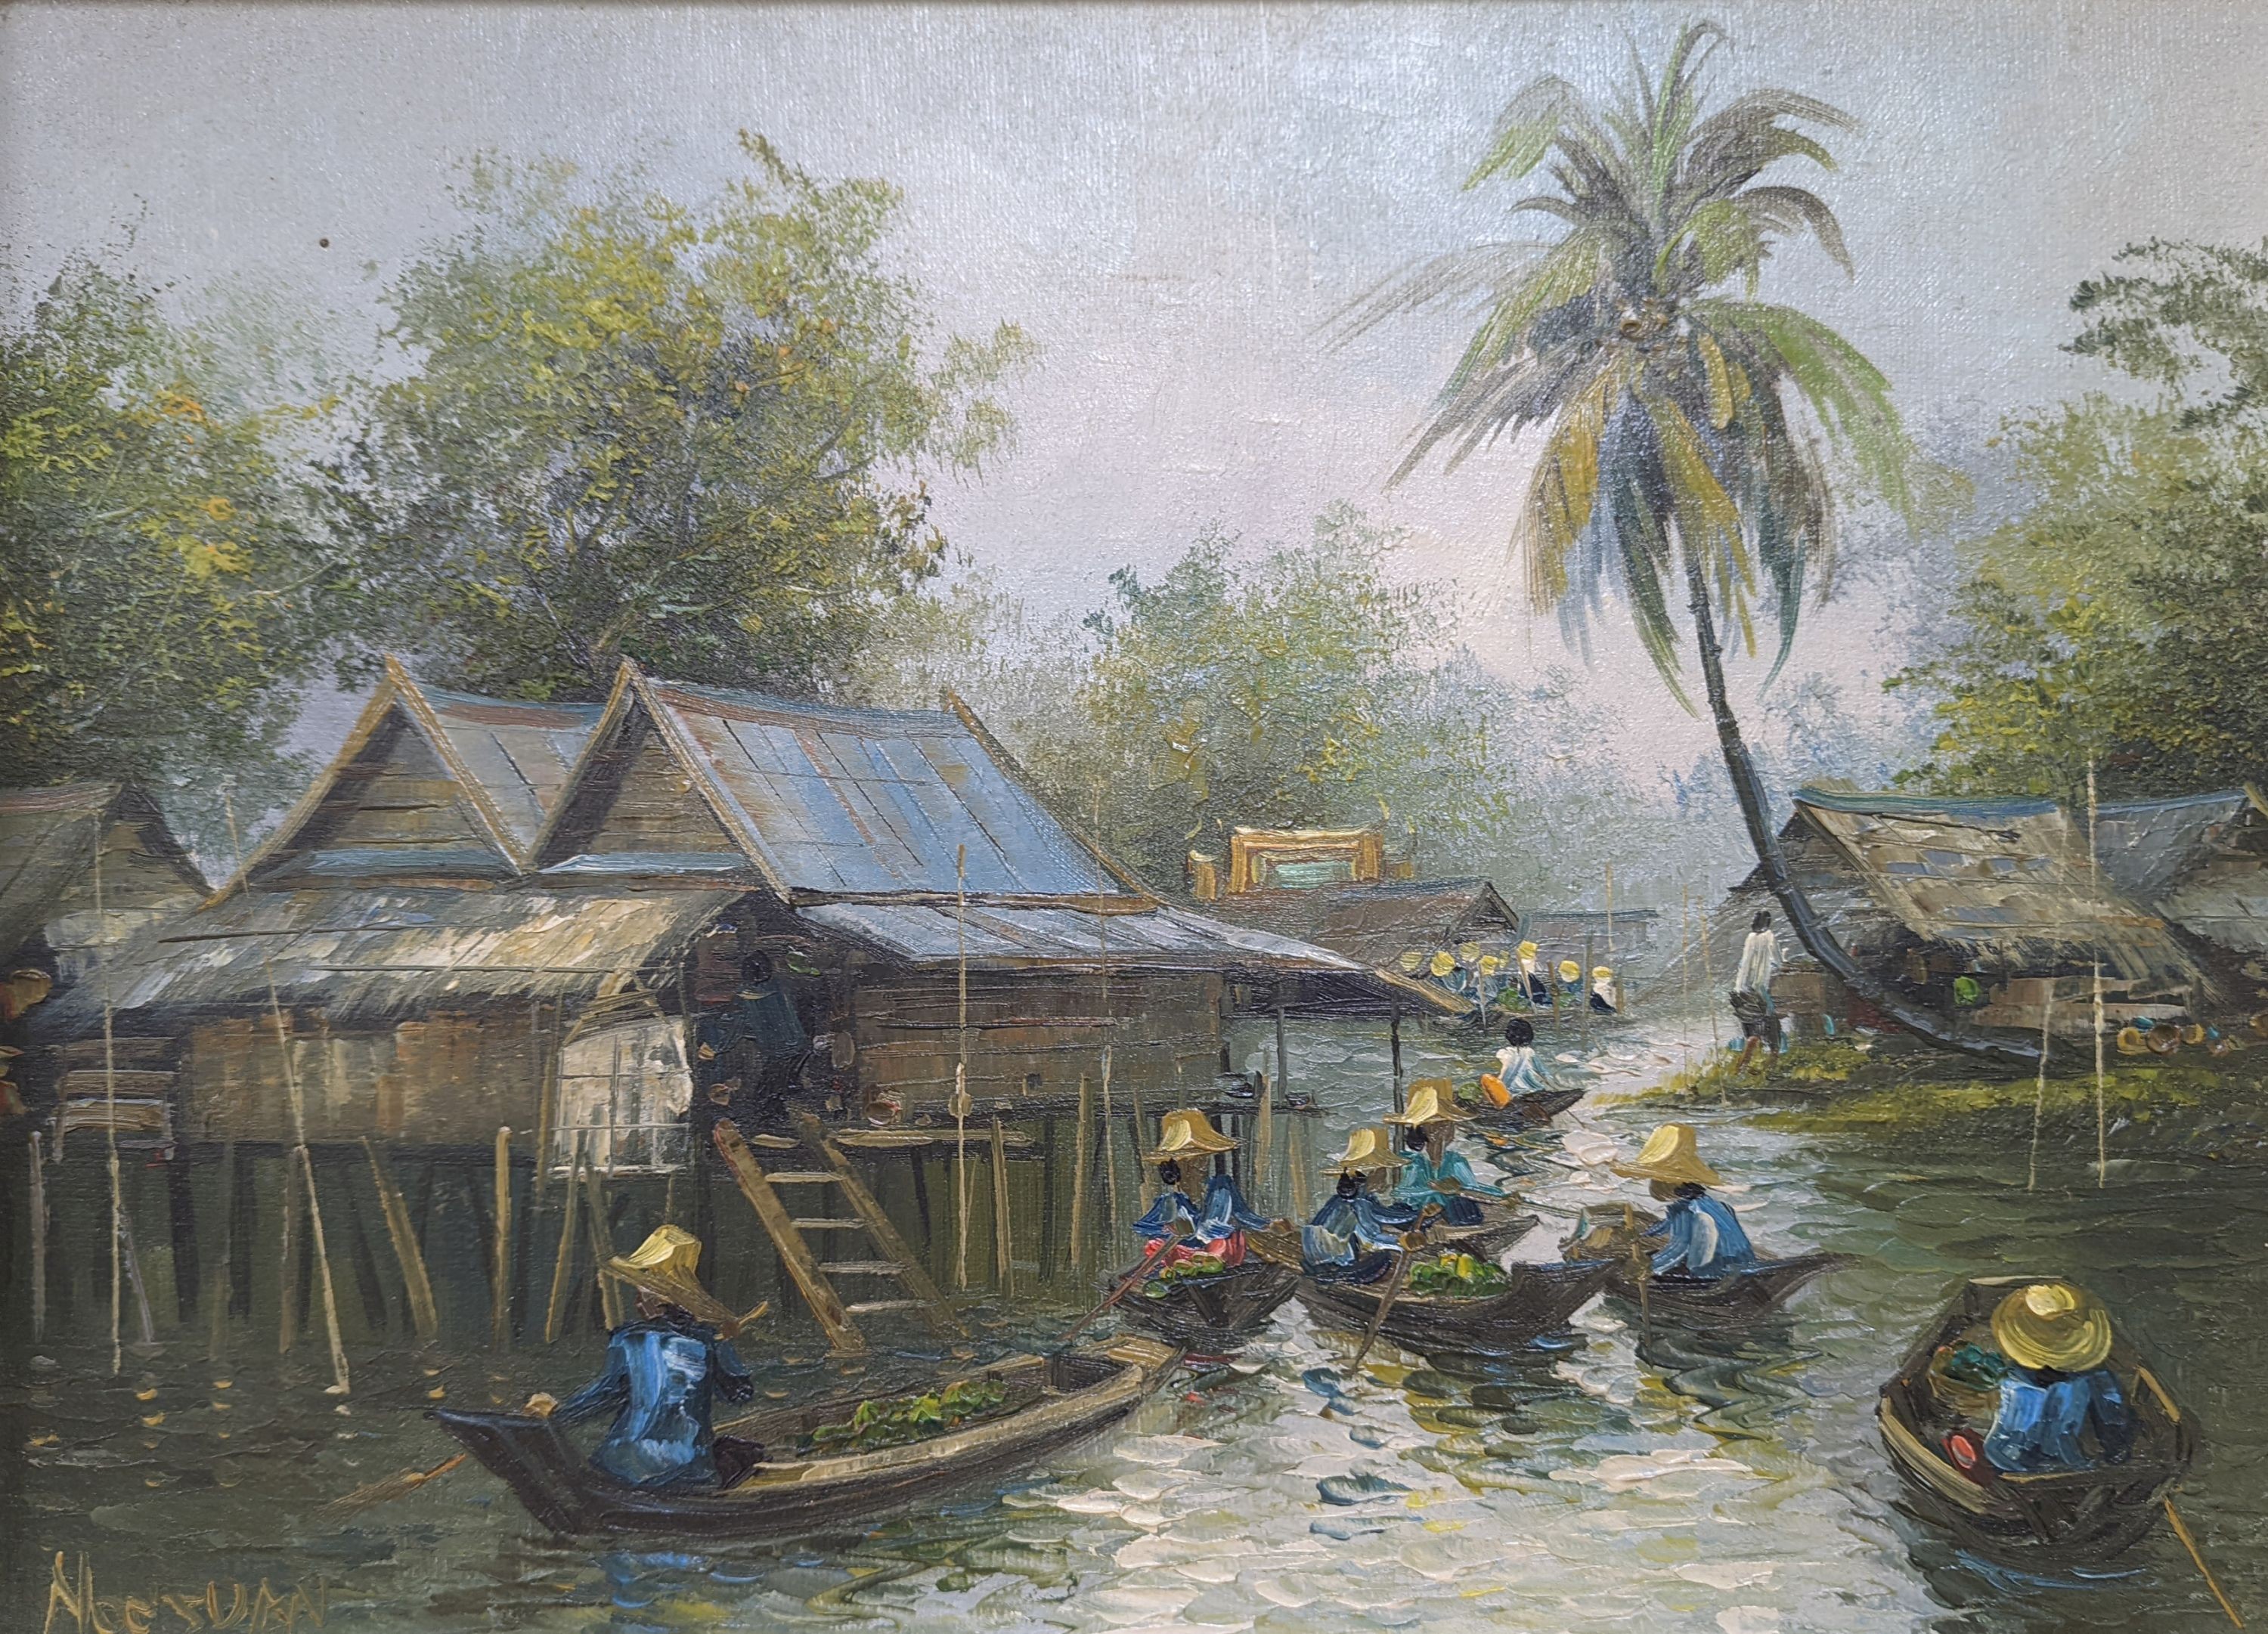 Nogsuan (b.1941), oil on canvas, Malaysian floating market, signed, 28 x 38cm